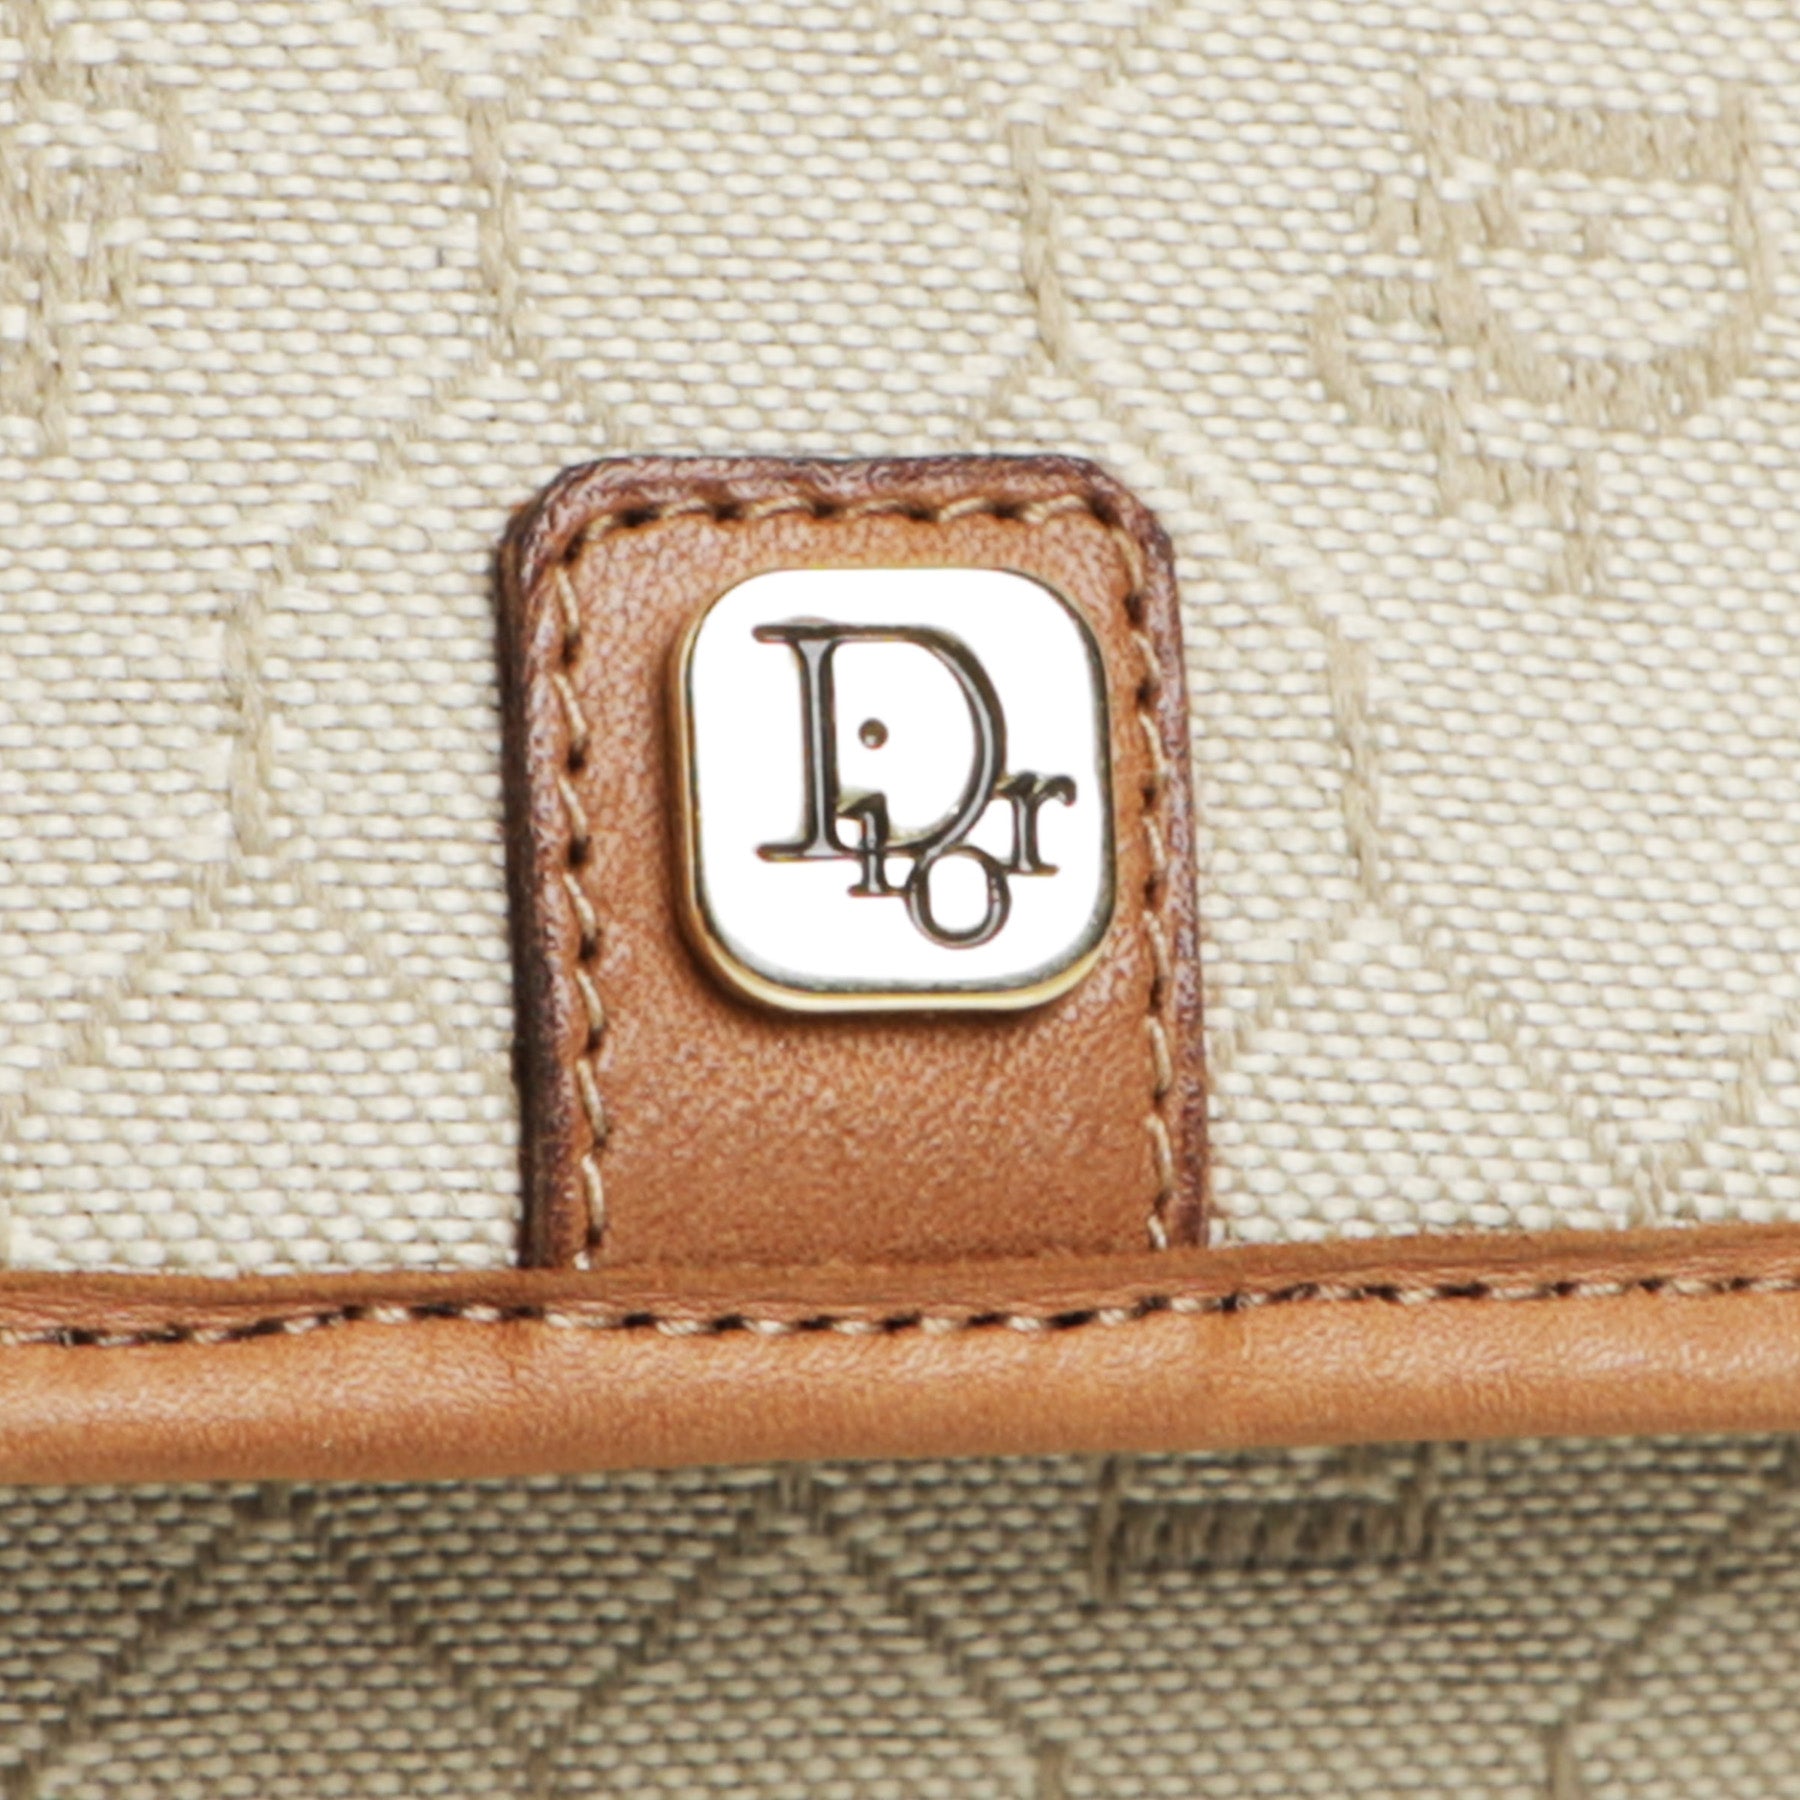 Christian Dior vintage honeycomb monogrammed canvas white small